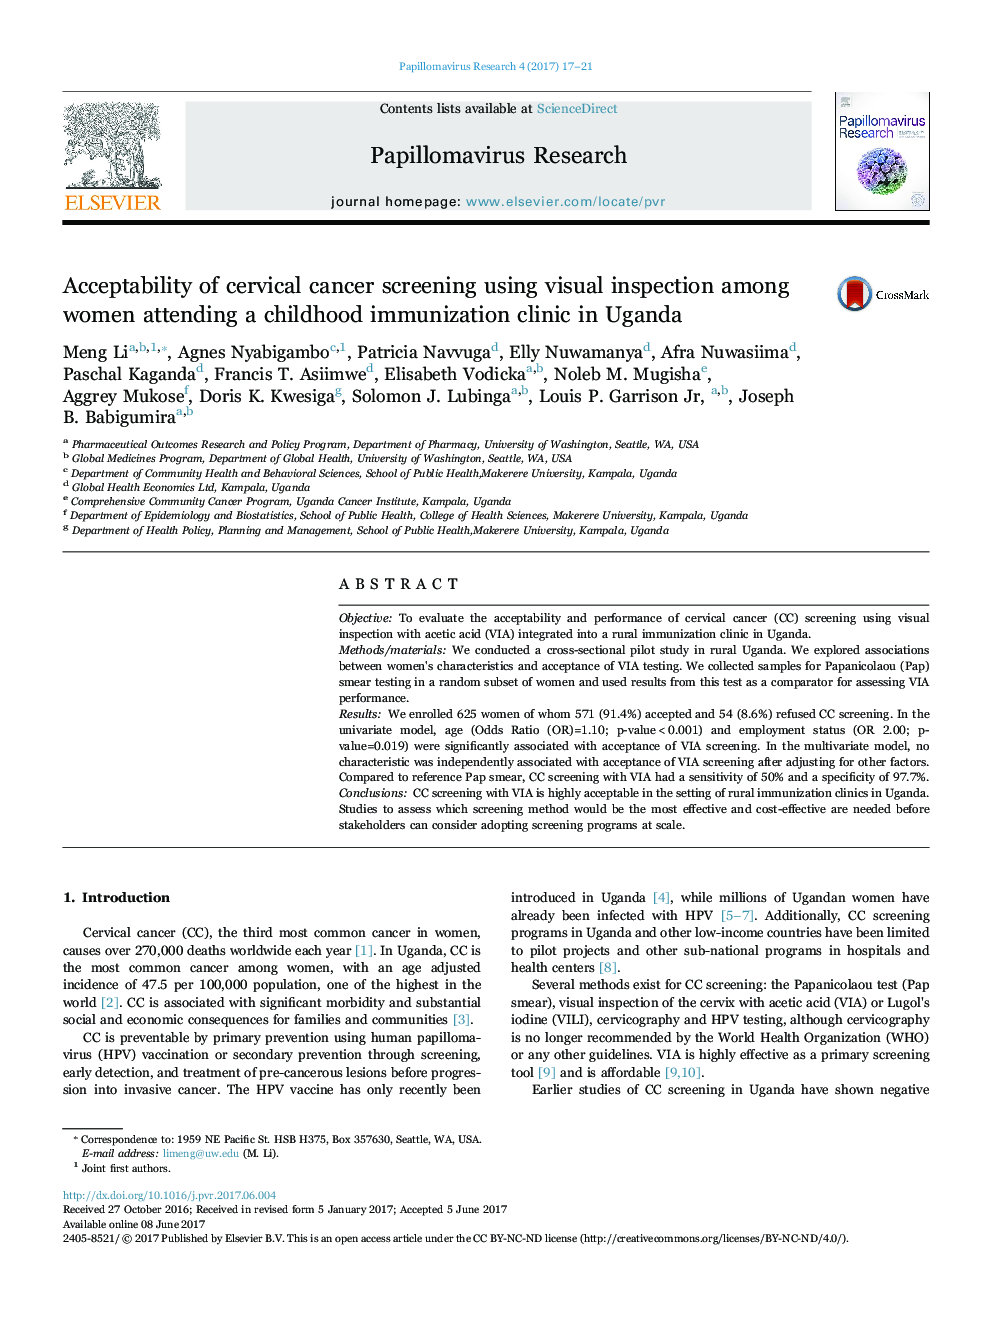 Acceptability of cervical cancer screening using visual inspection among women attending a childhood immunization clinic in Uganda